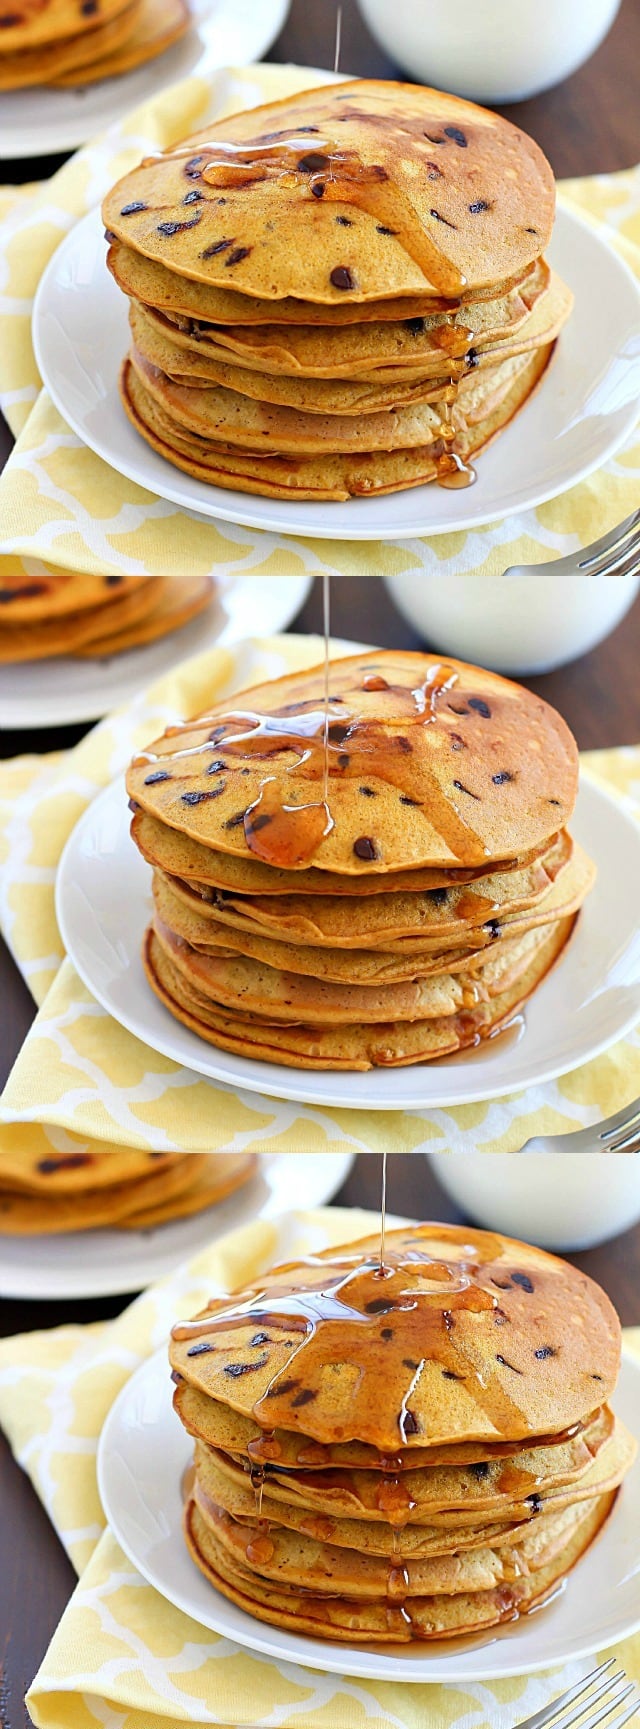 Flavorful pancakes full of pumpkin and chocolate chips that are also whole wheat and dairy-free! My family ate all of these and I had to make a second batch!